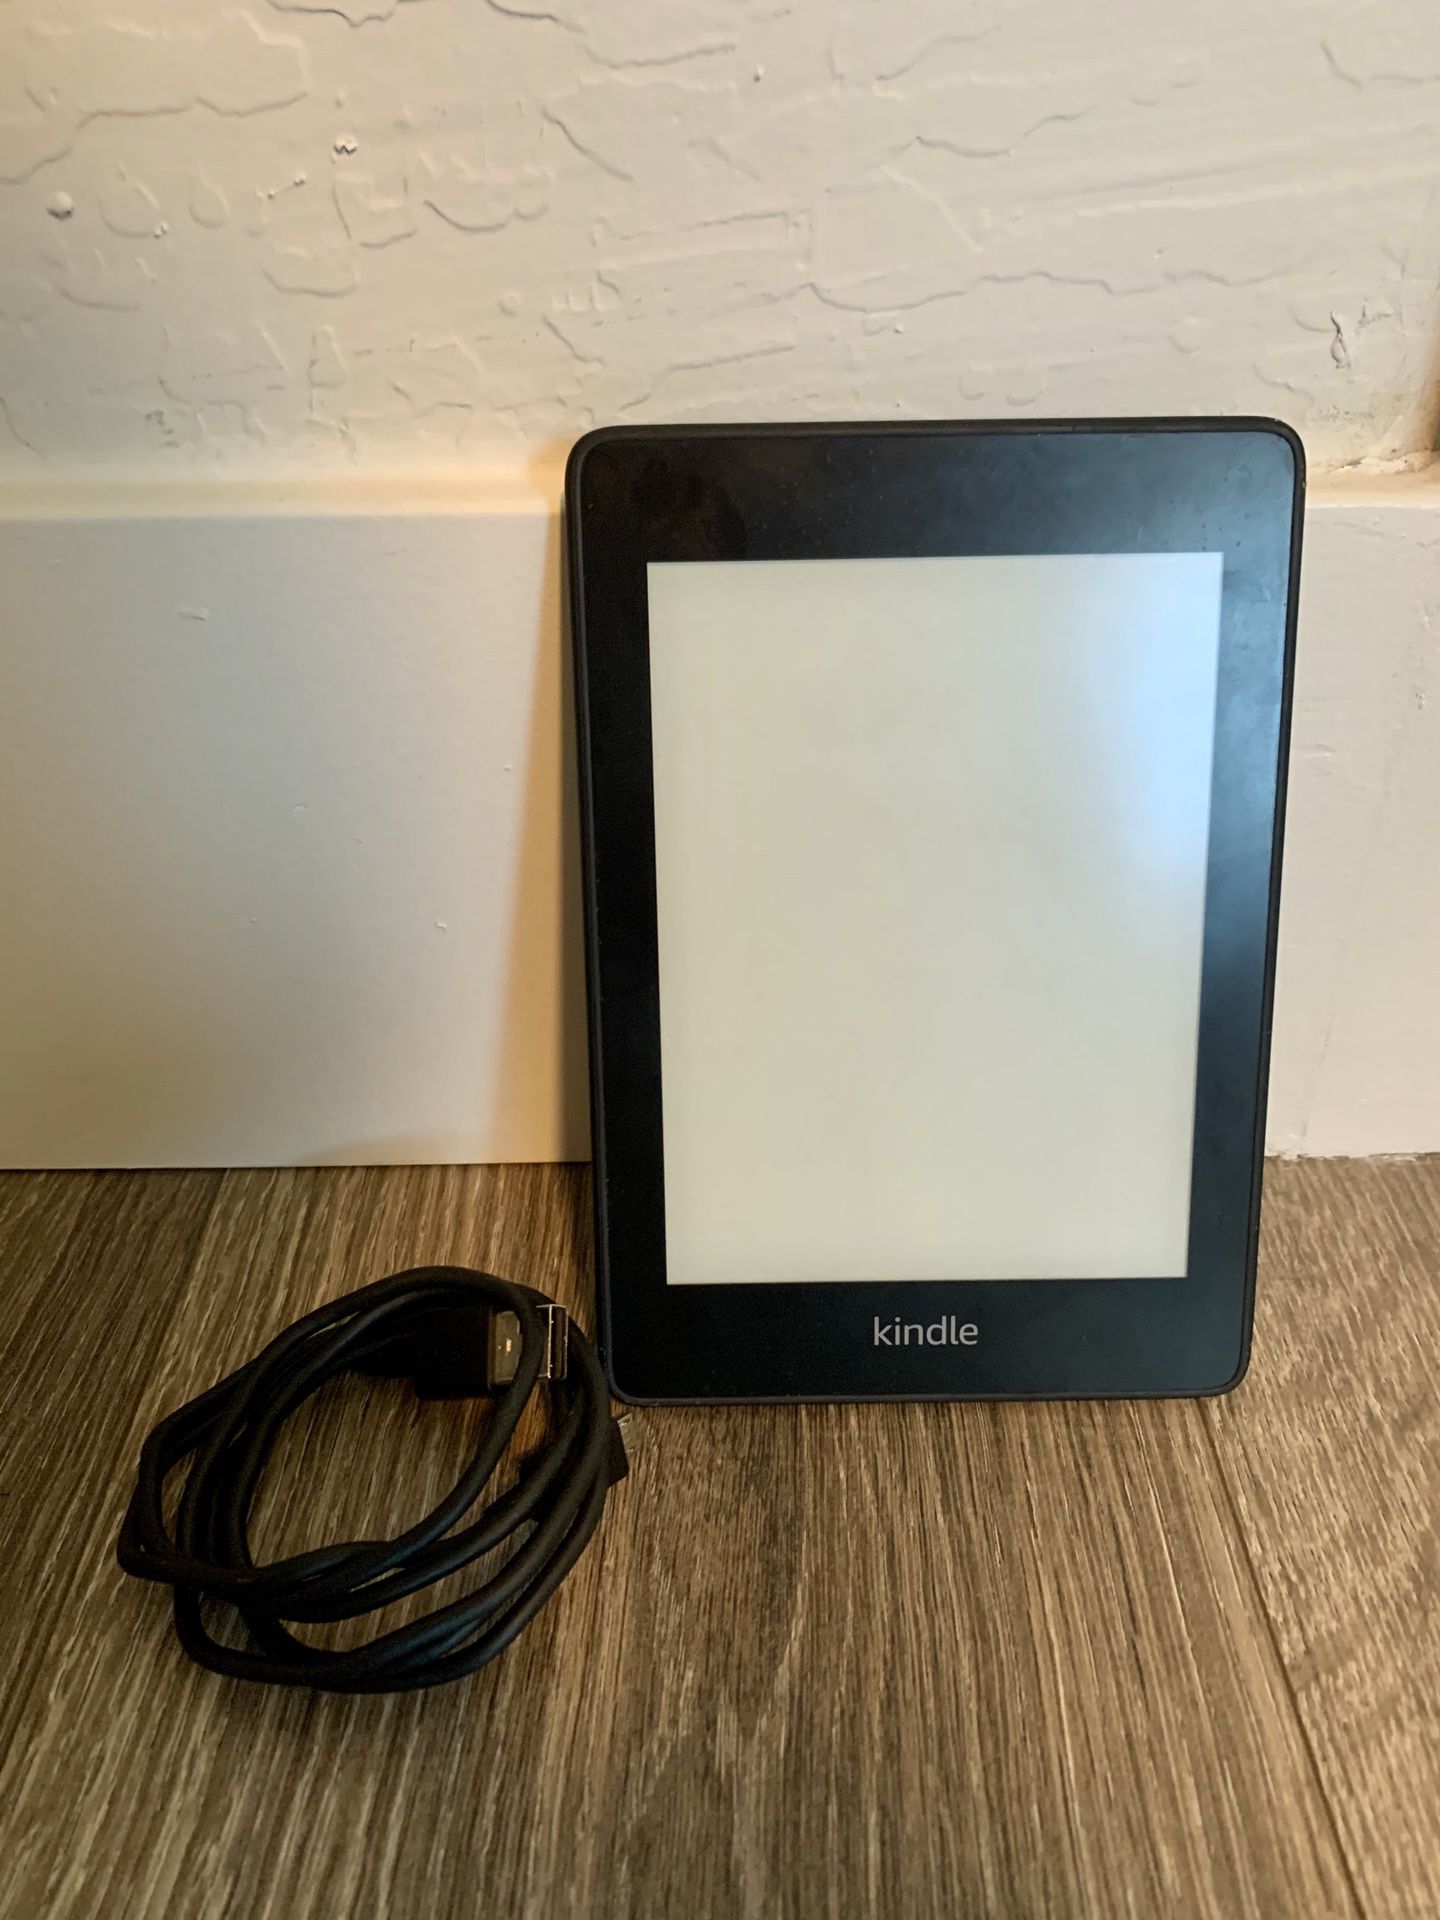 2019 Kindle Paperwhite 8GB with special offers